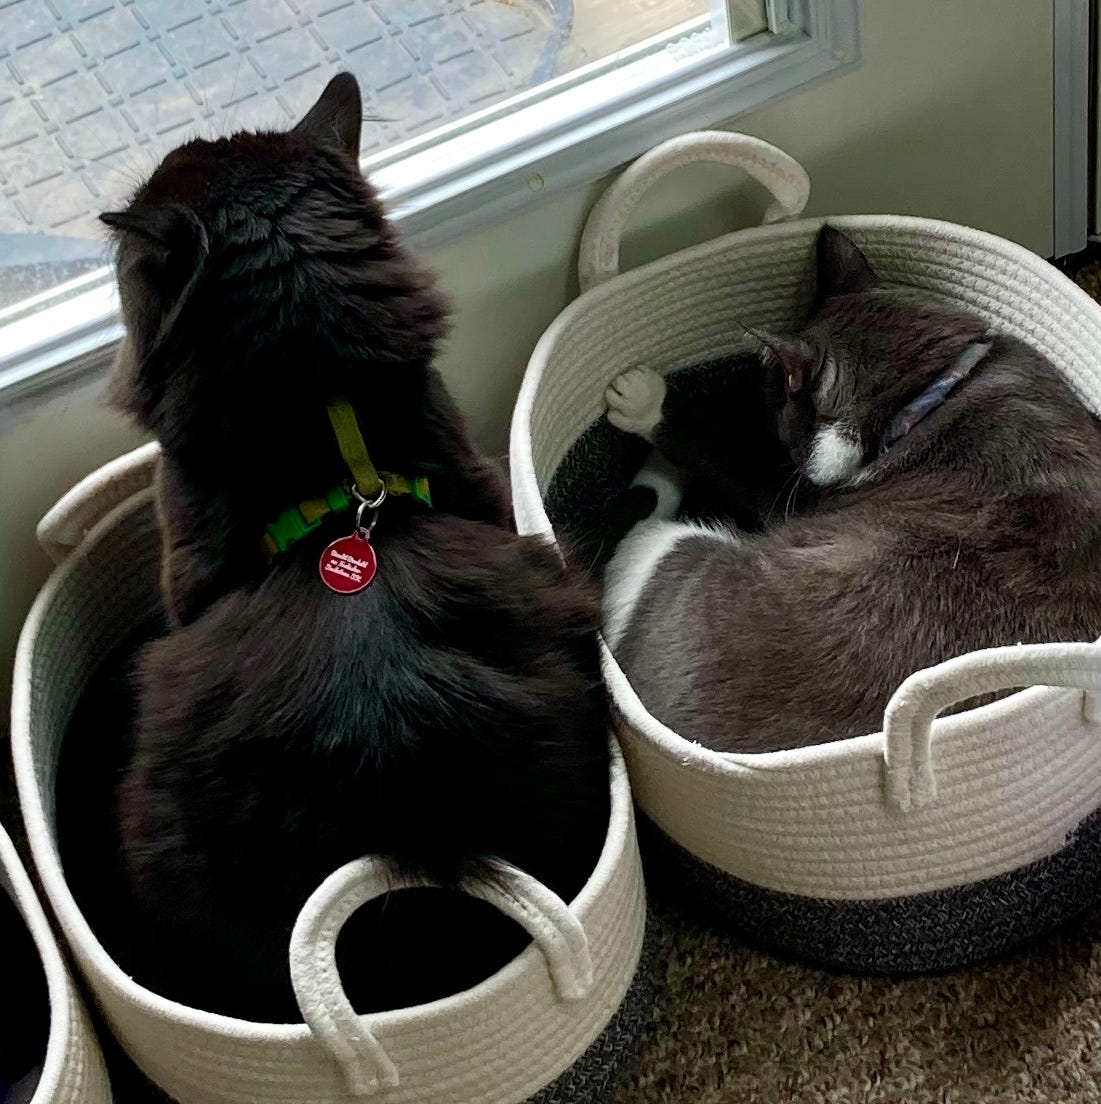 Two cats sitting in baskets